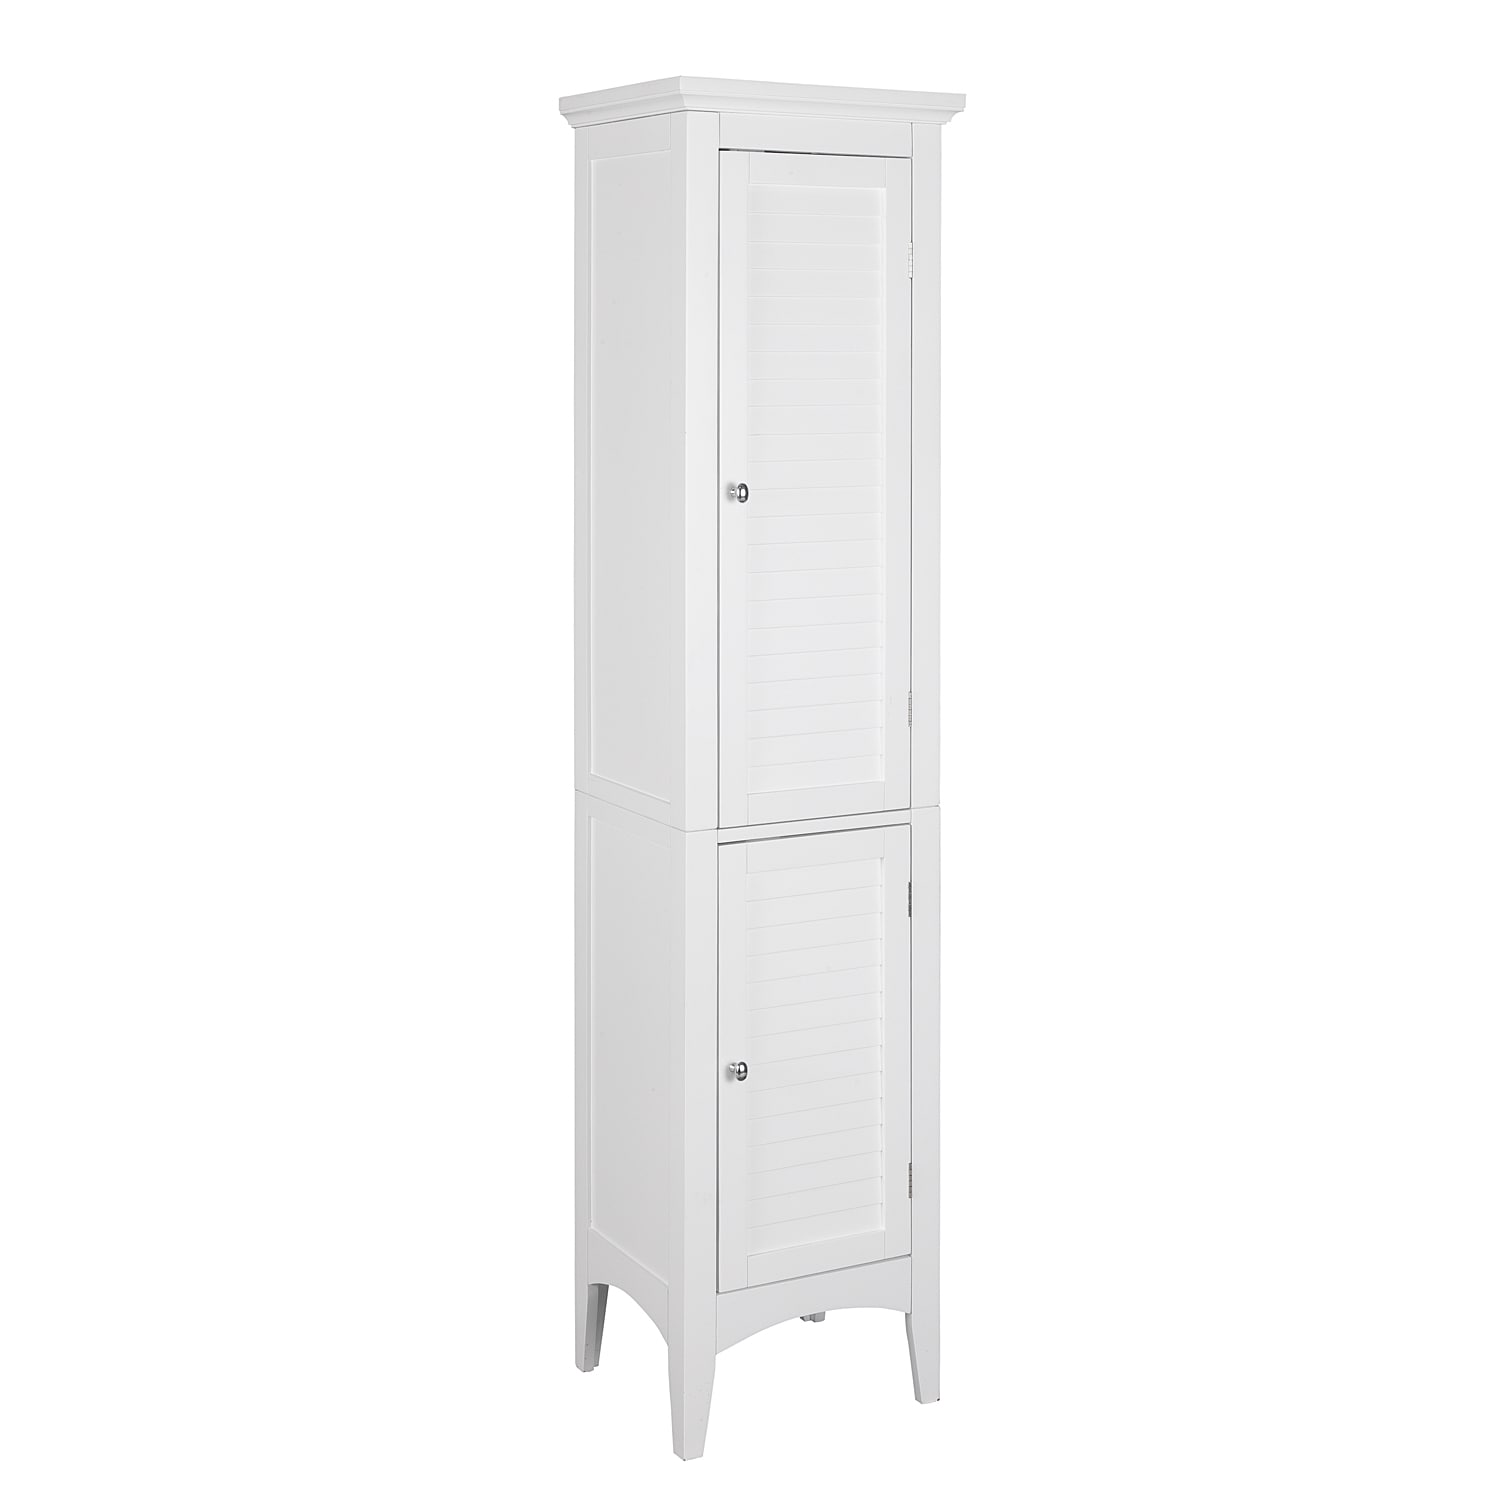 Angeles Home 6.5 in. W x 7 in. D x 27 in. H White Freestanding Narrow Linen Cabinet with 4-Shelves and Top Slot for Bathroom